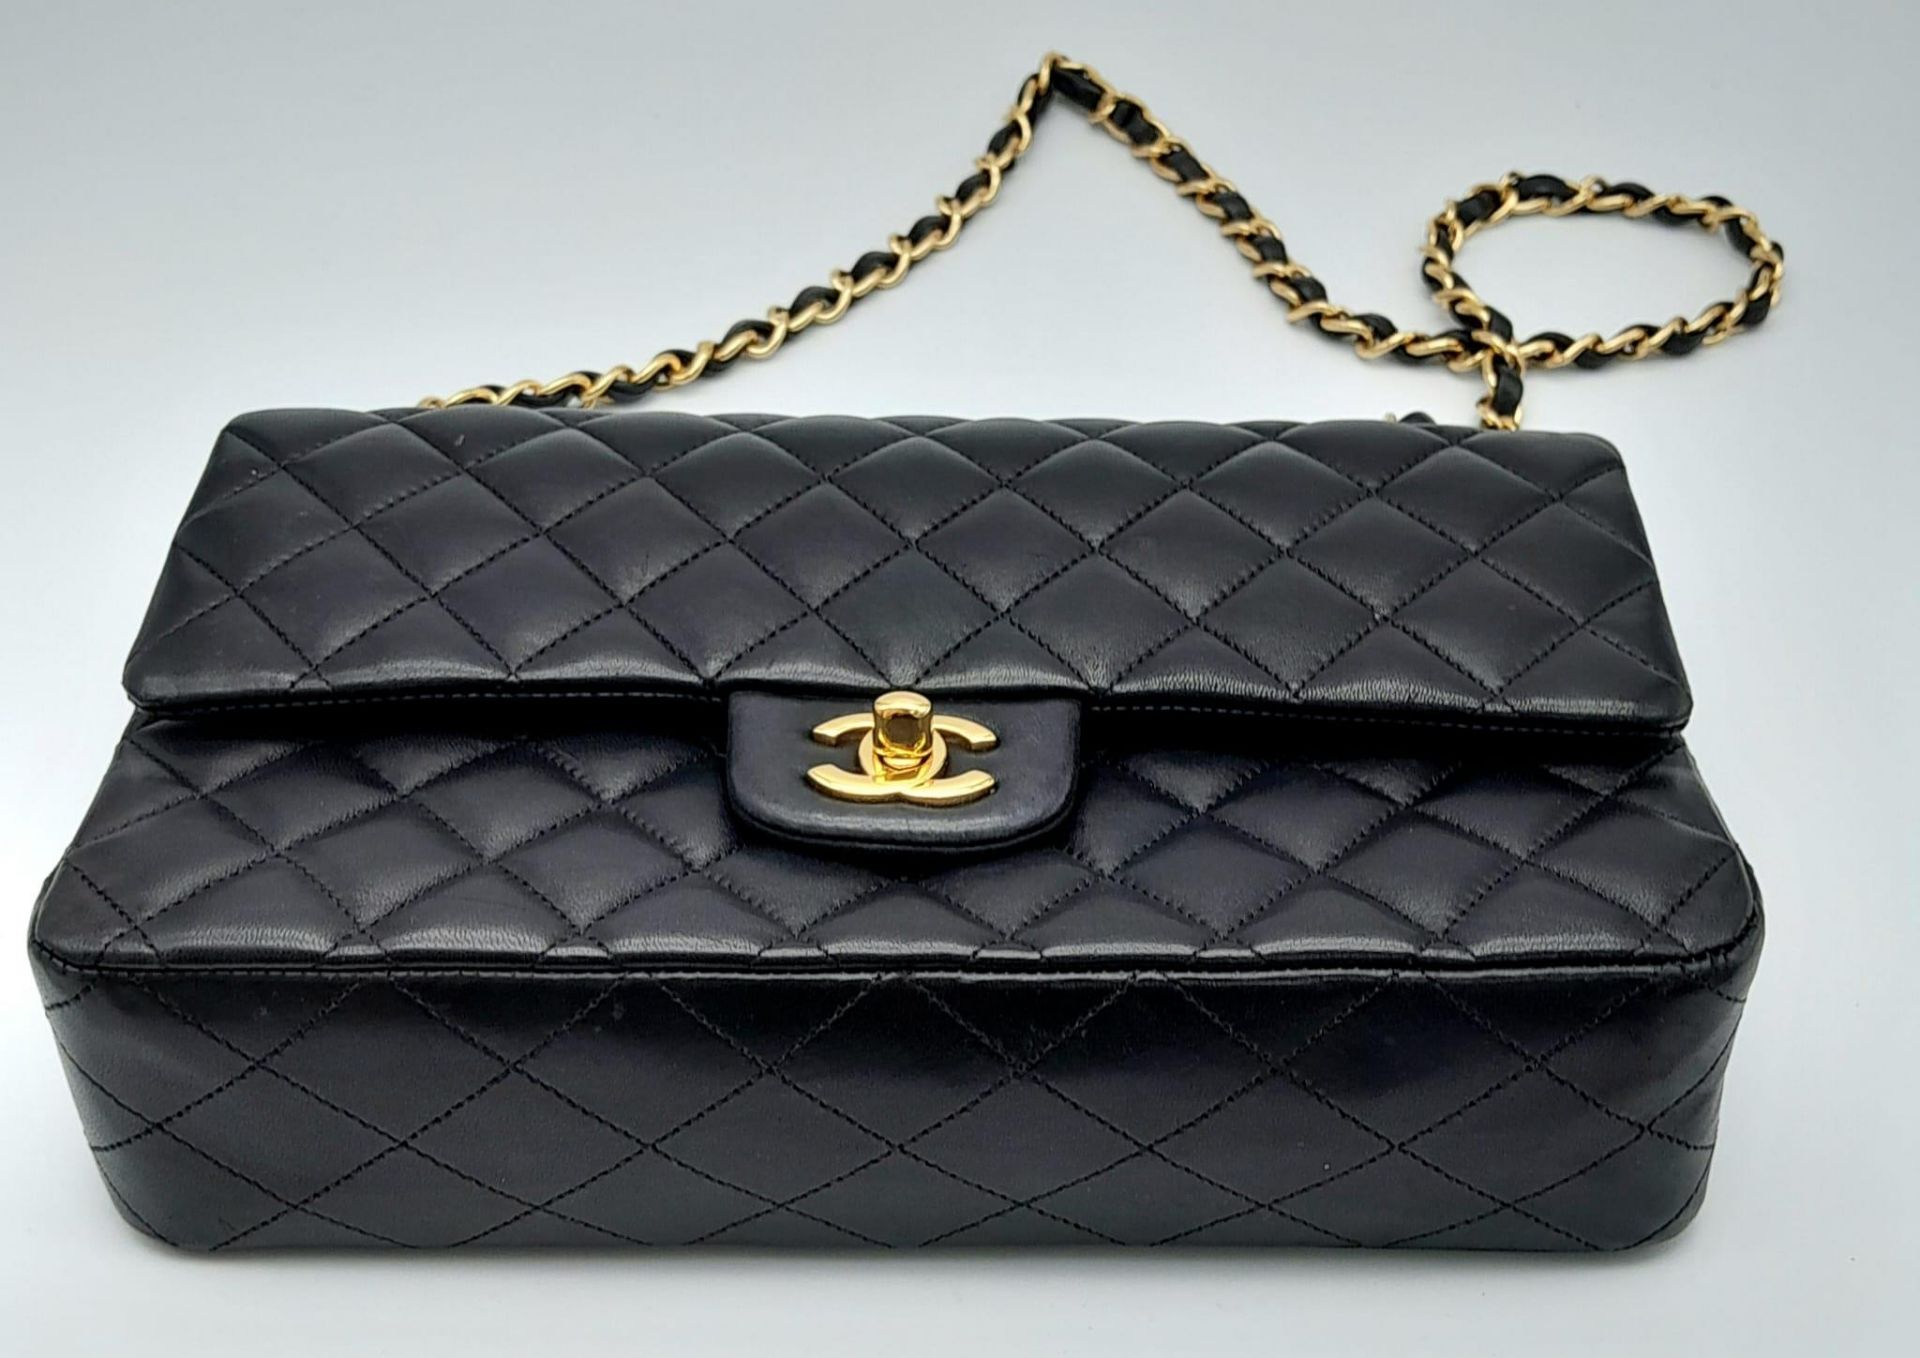 A Classic Chanel Double Flap Bag. Quilted lambskin black leather exterior with gilded Chanel logo - Image 3 of 13